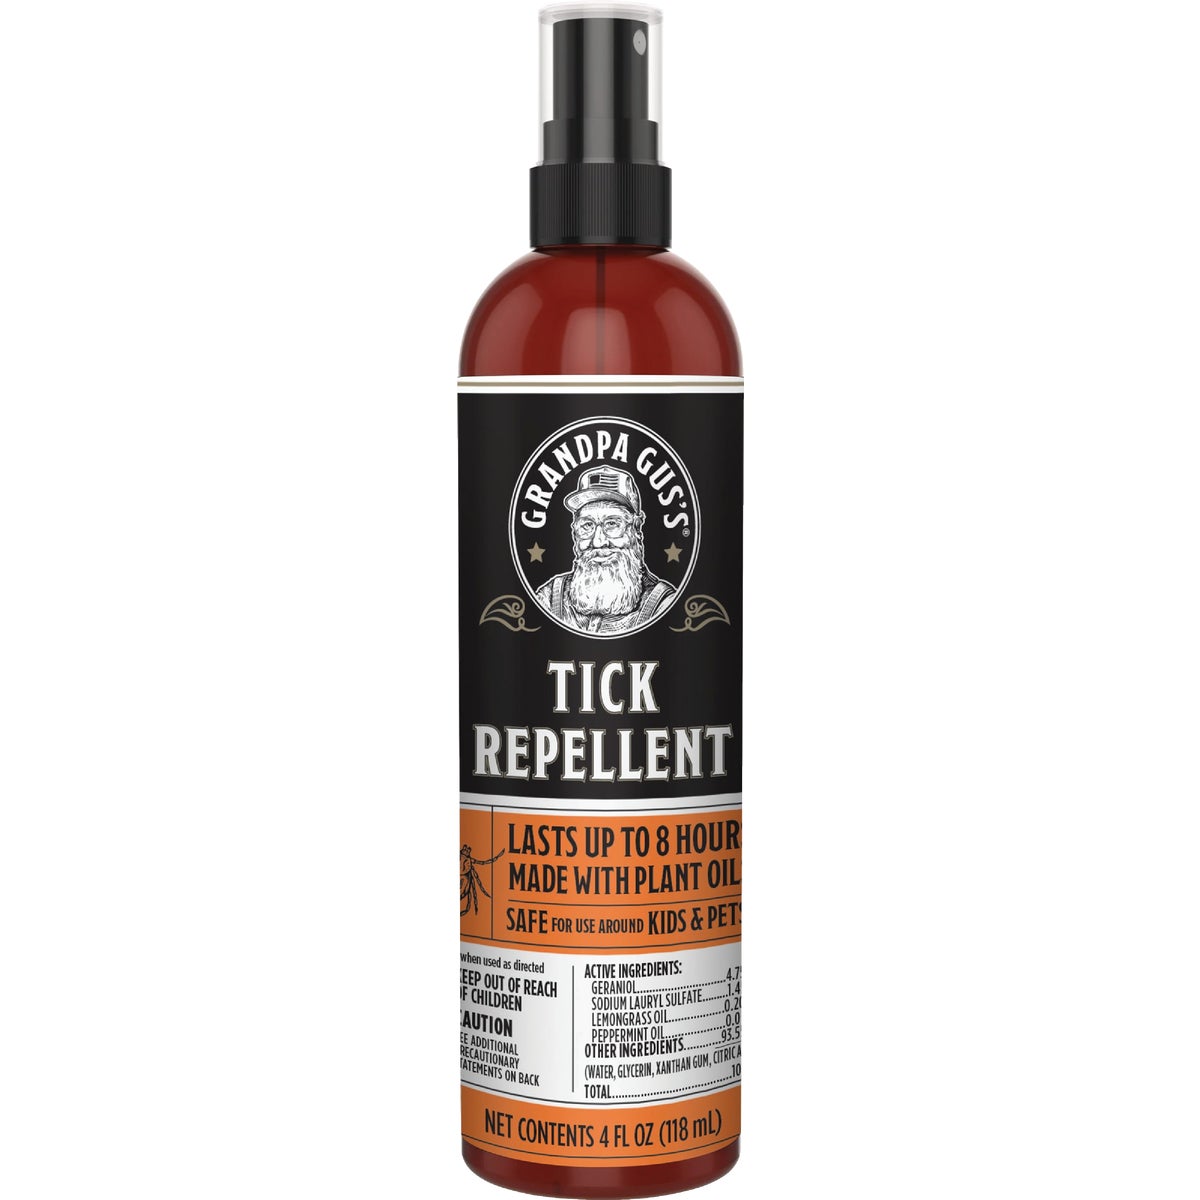 Item 705751, All natural, deet-free tick repellent safe for adults, kids, and dogs.